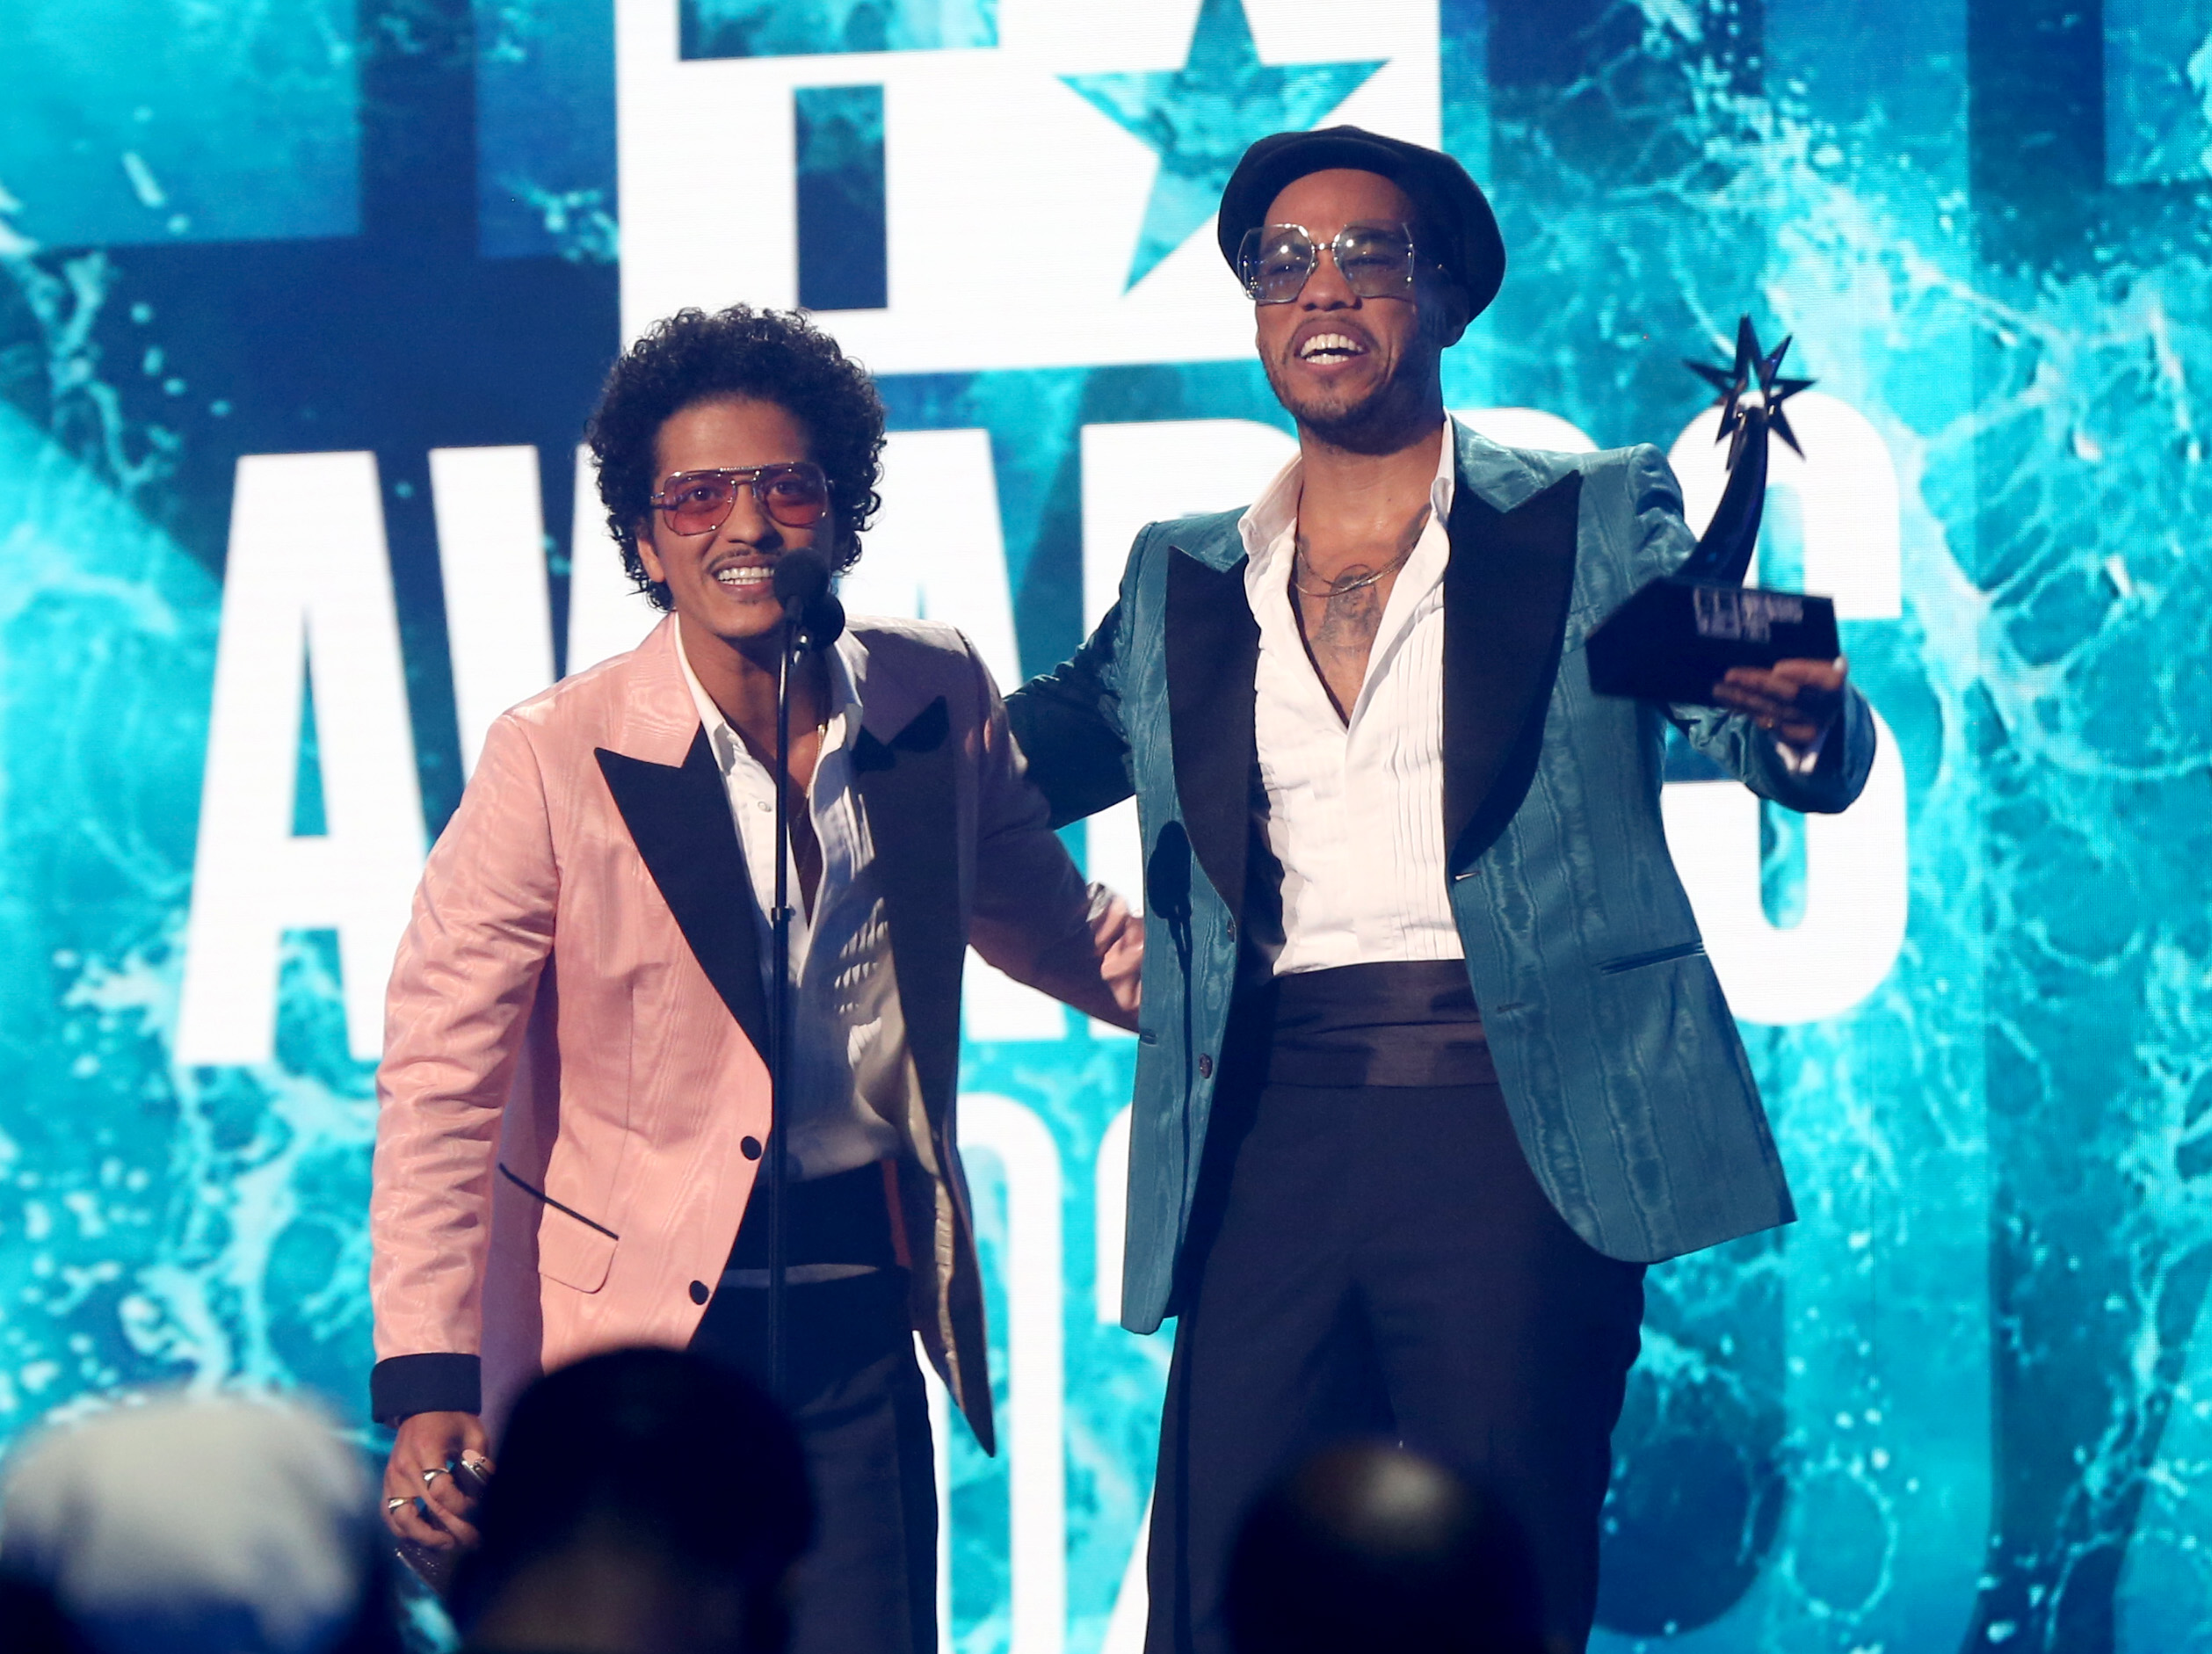 Bruno Mars and Anderson .Paak of Silk Sonic smiling accepting an award